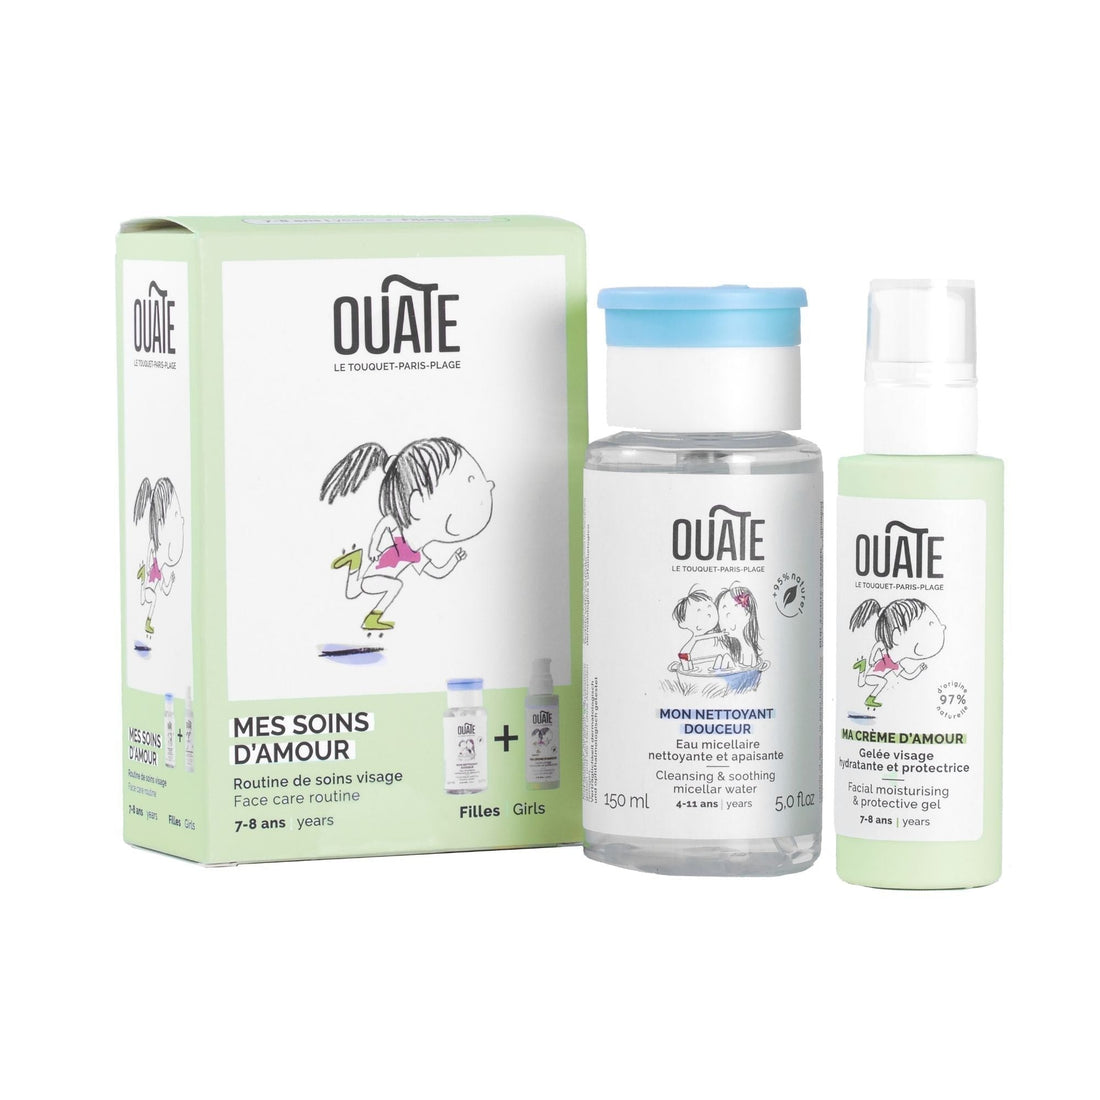 ouate-my-loving-skincare-set-7-8y-girl-ouat-1502020- (1)